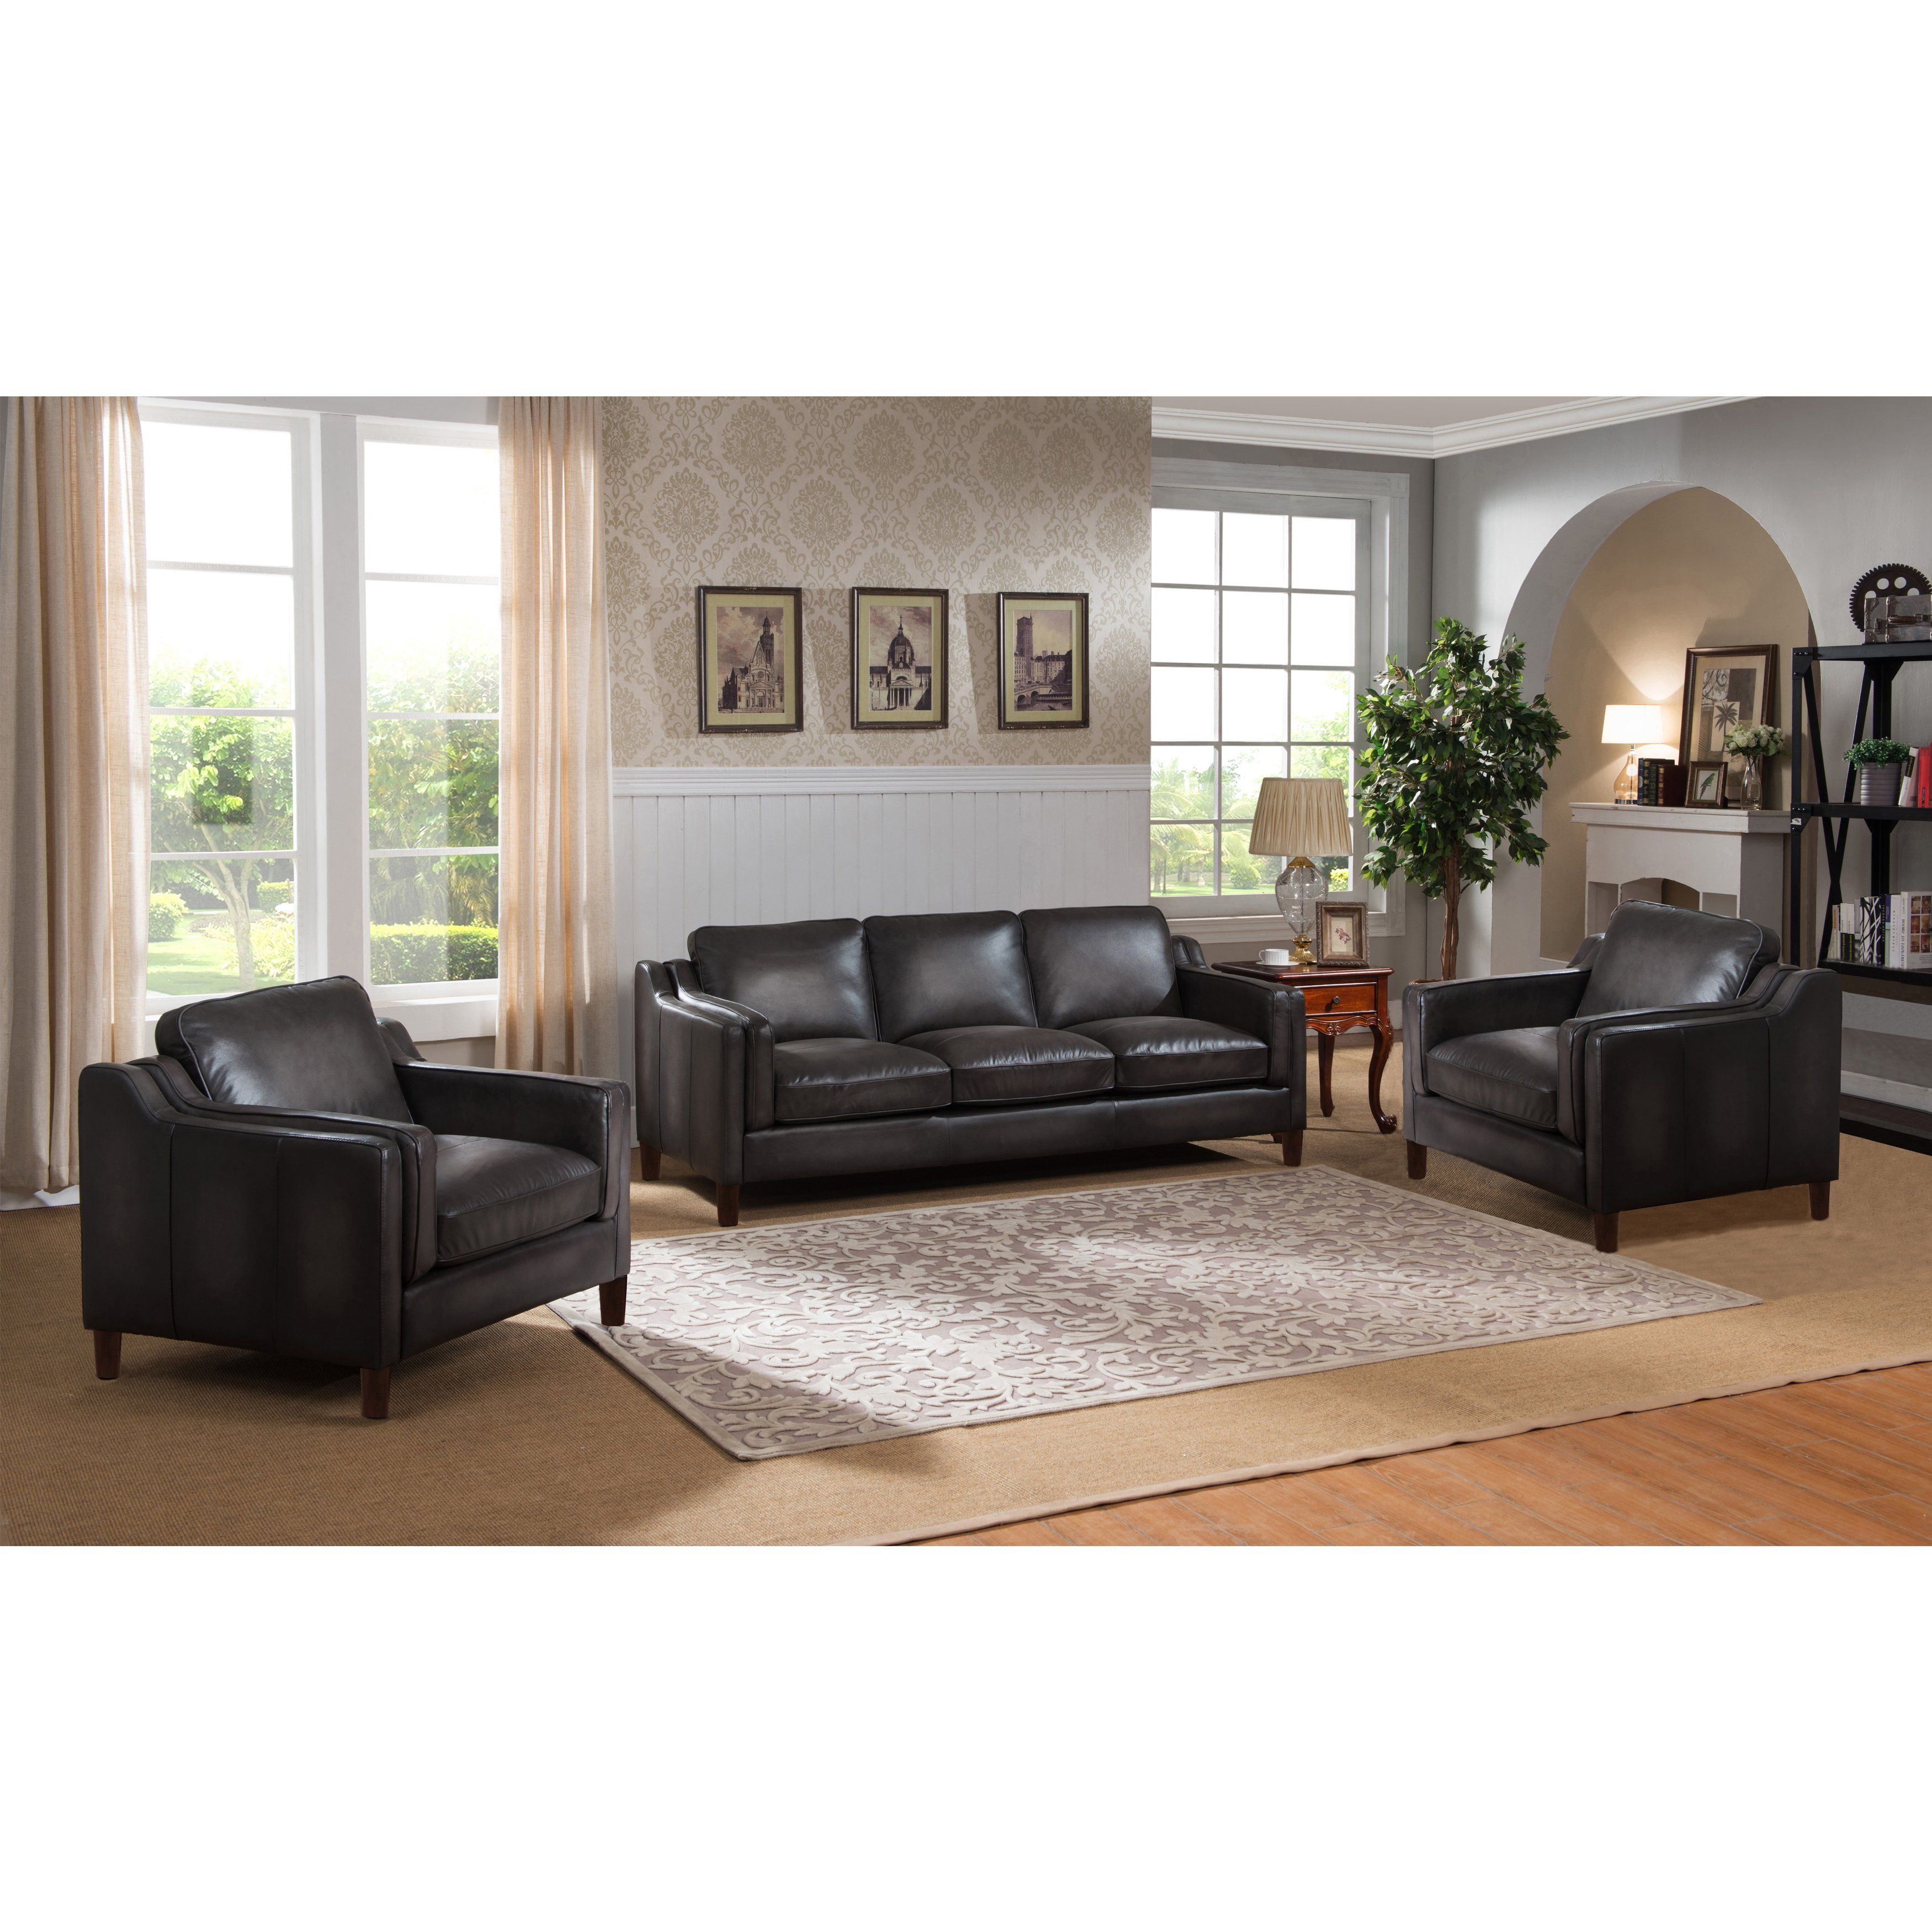 Shop Ames Premium Hand Rubbed Grey Top Grain Leather Sofa And Two Pertaining To Ames Arm Sofa Chairs (View 5 of 20)